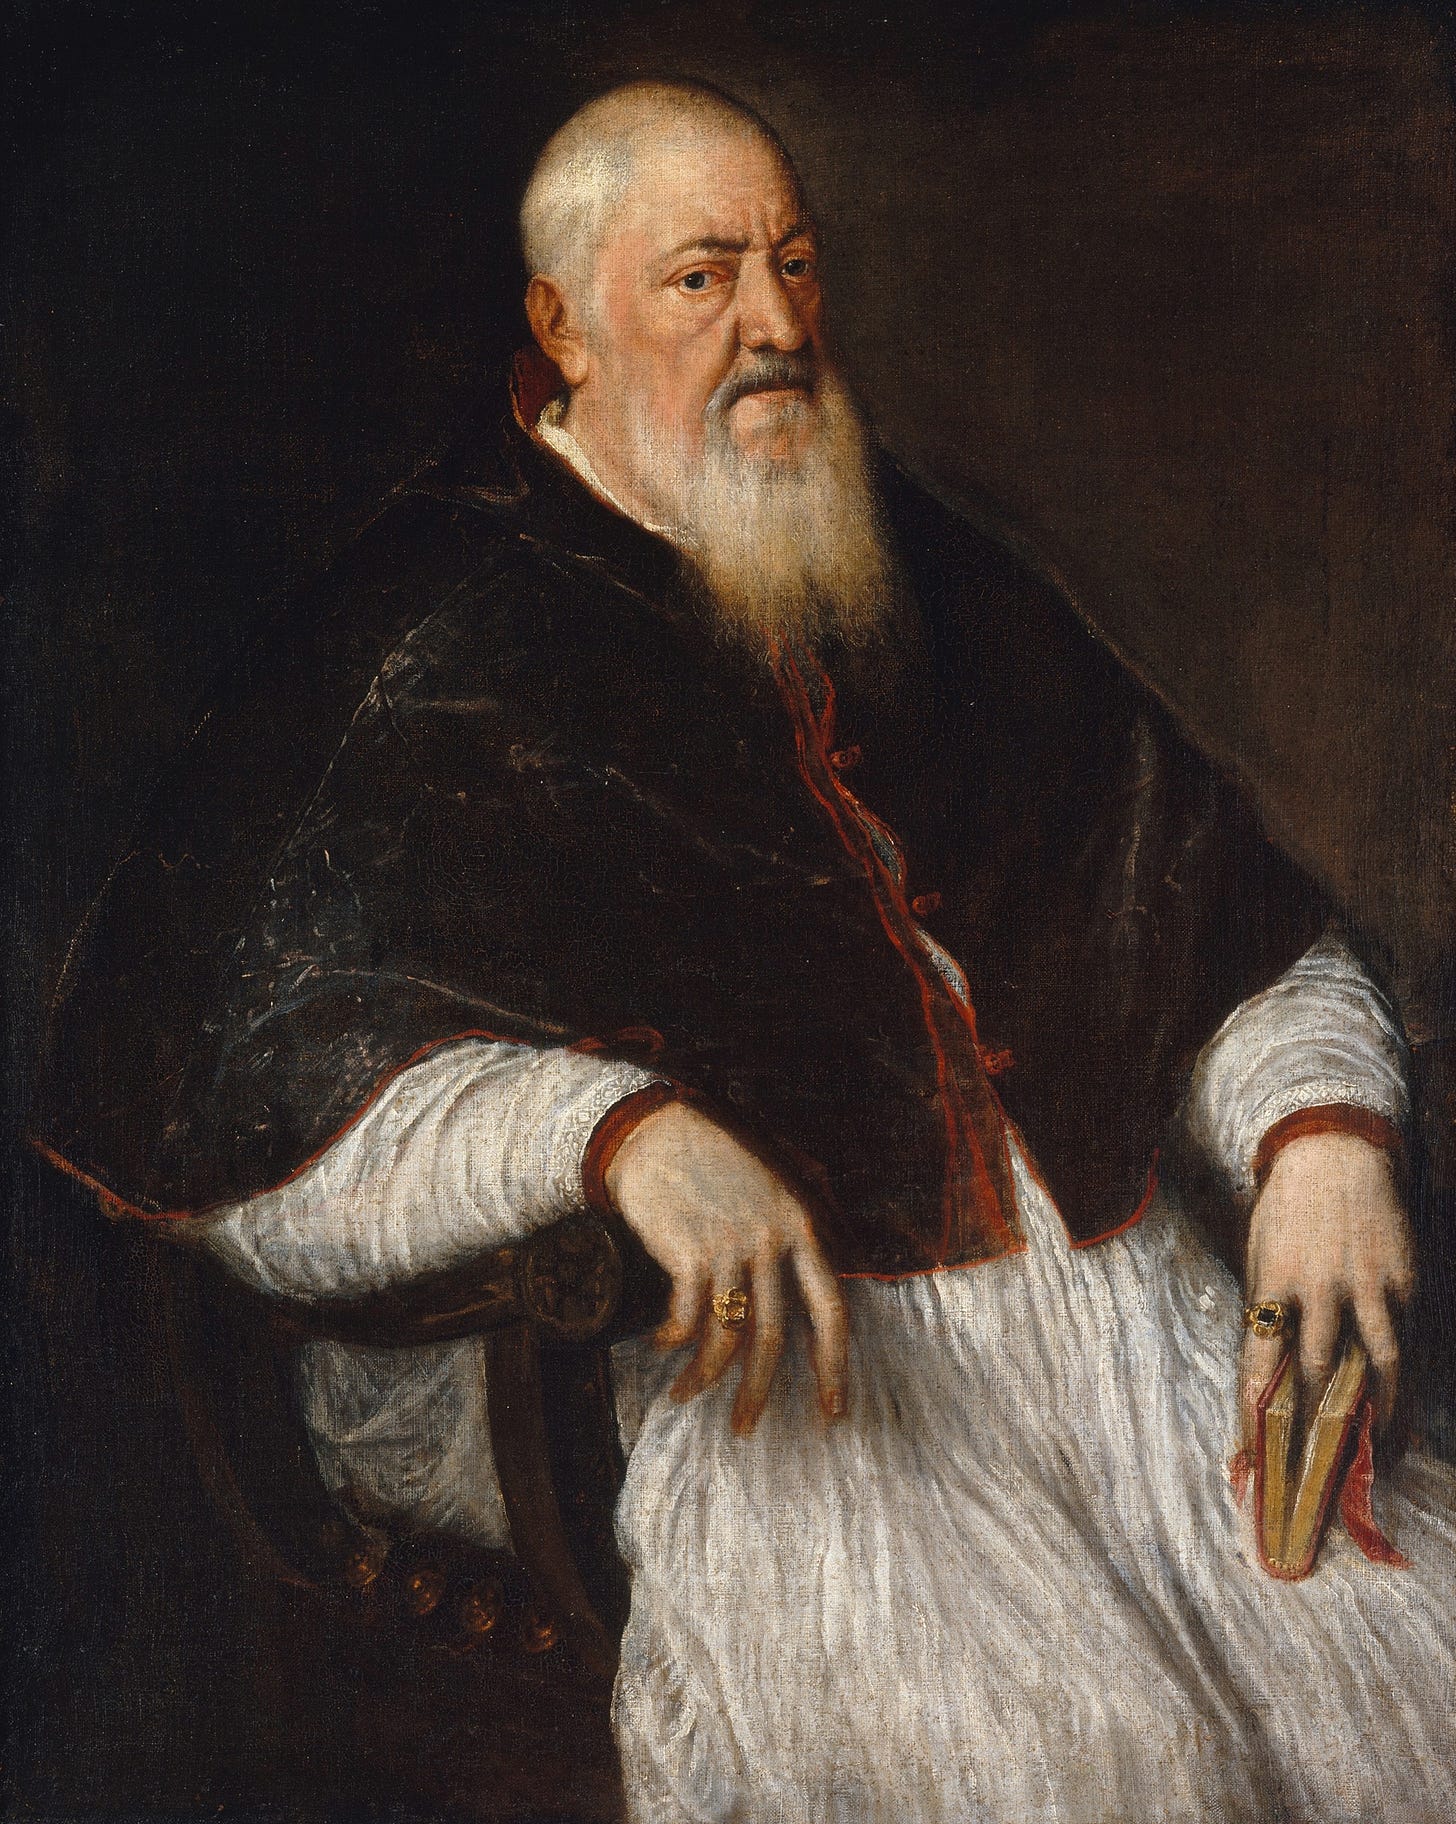 Filippo Archinto (born about 1500, died 1558), Archbishop of Milan (mid-1550s)